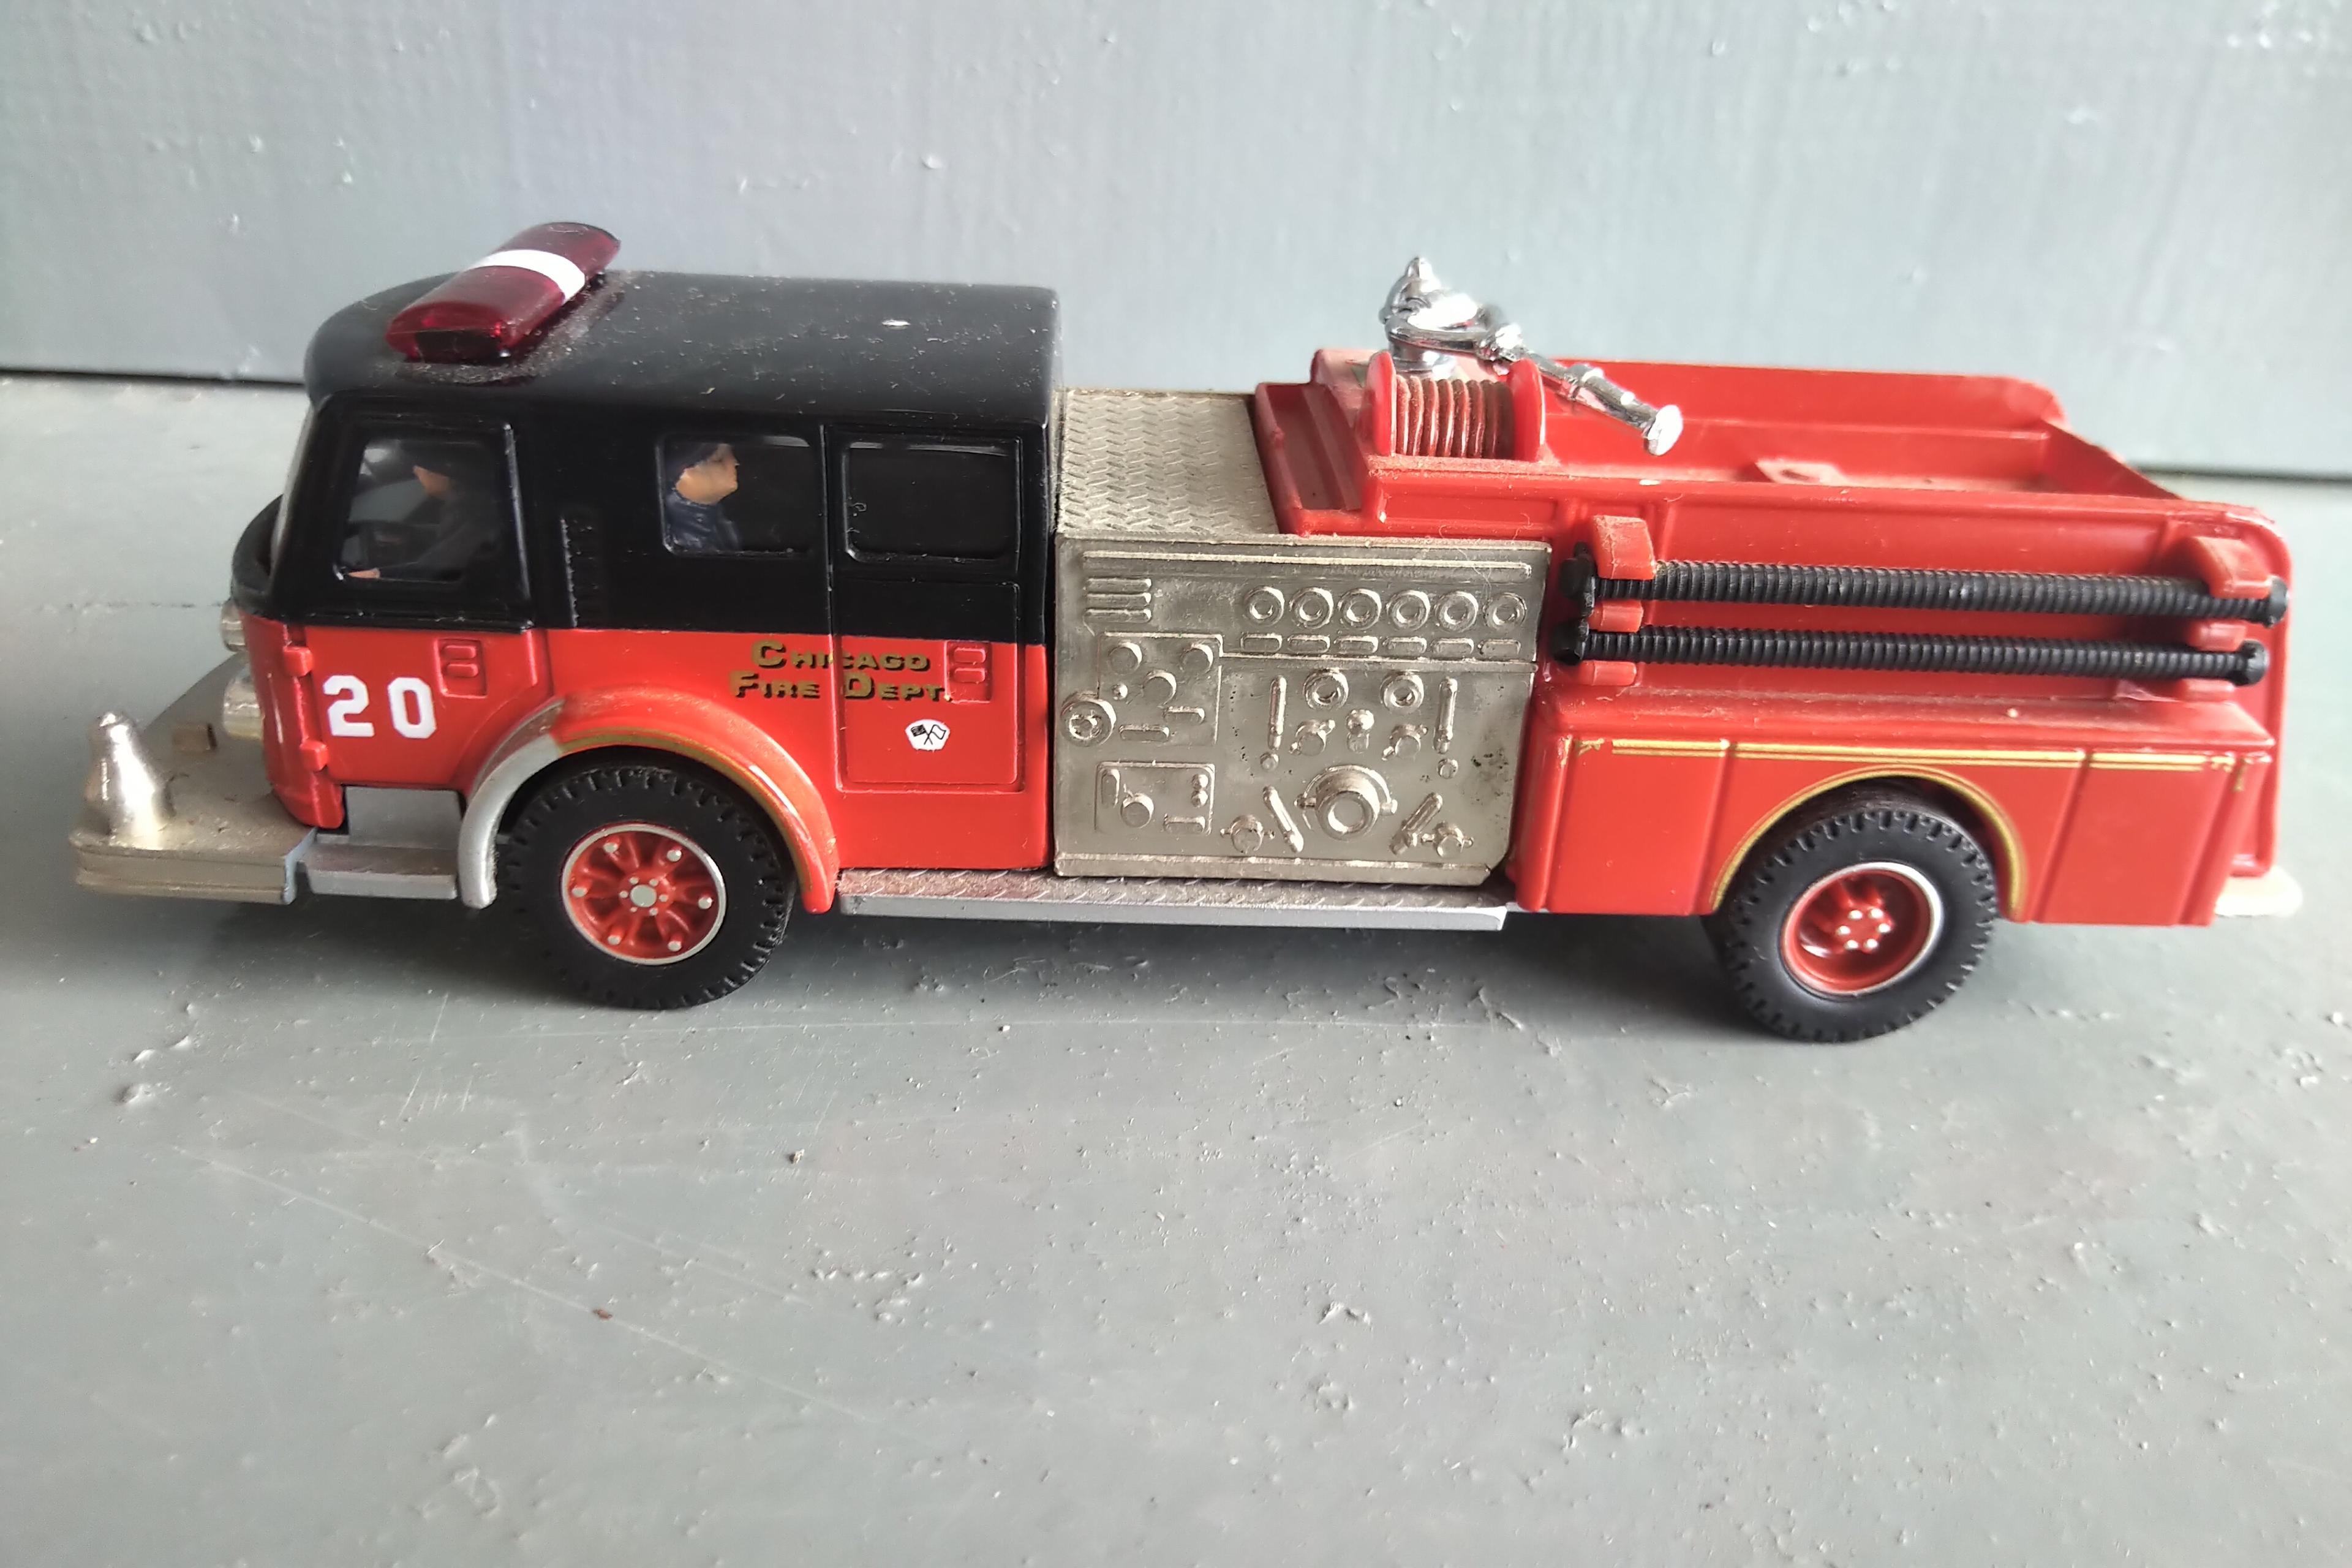 A TUBE OF 12 - 1/64 SCALE FIRE TRUCKS, A 1/64 SCALE POLICE CAR